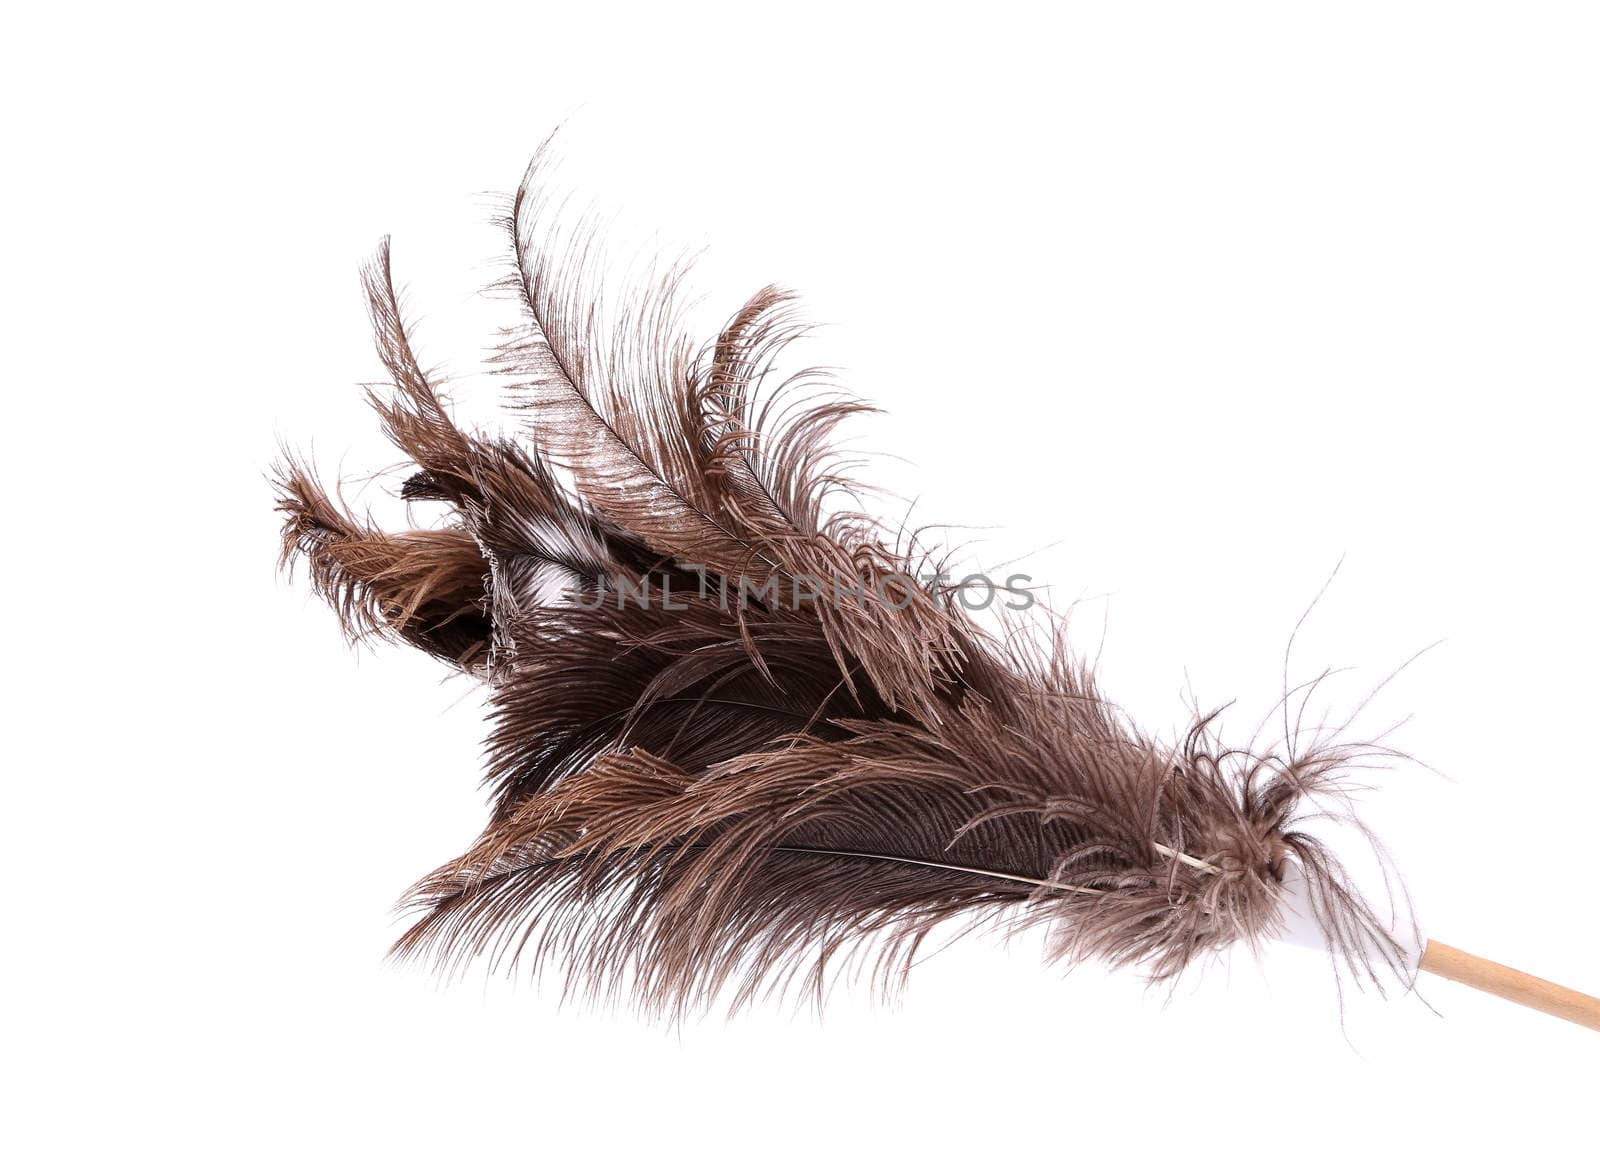 Brush ostrich feather by indigolotos